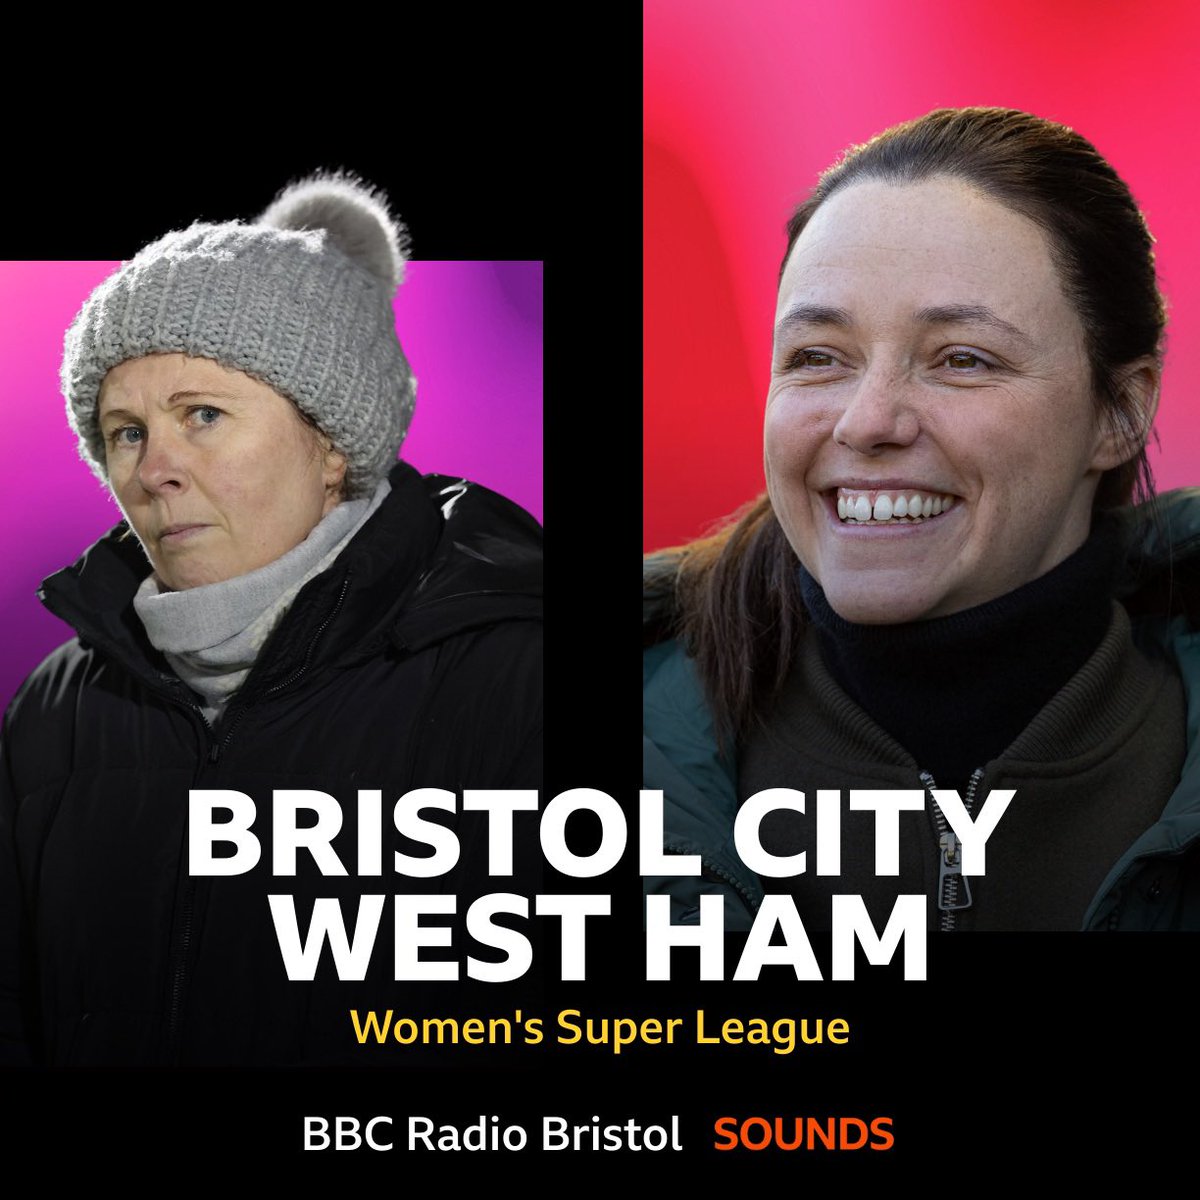 ⚽️ Bristol City Women 🆚 West Ham Women 🎙️ Build up & commentary from 1.30pm with @VickiBlight, @SimsonPete & Frankie Brown 📻 @BBCRB 94.9FM, 104.6FM, DAB 💻📱@BBCSounds 📺 Freeview 719